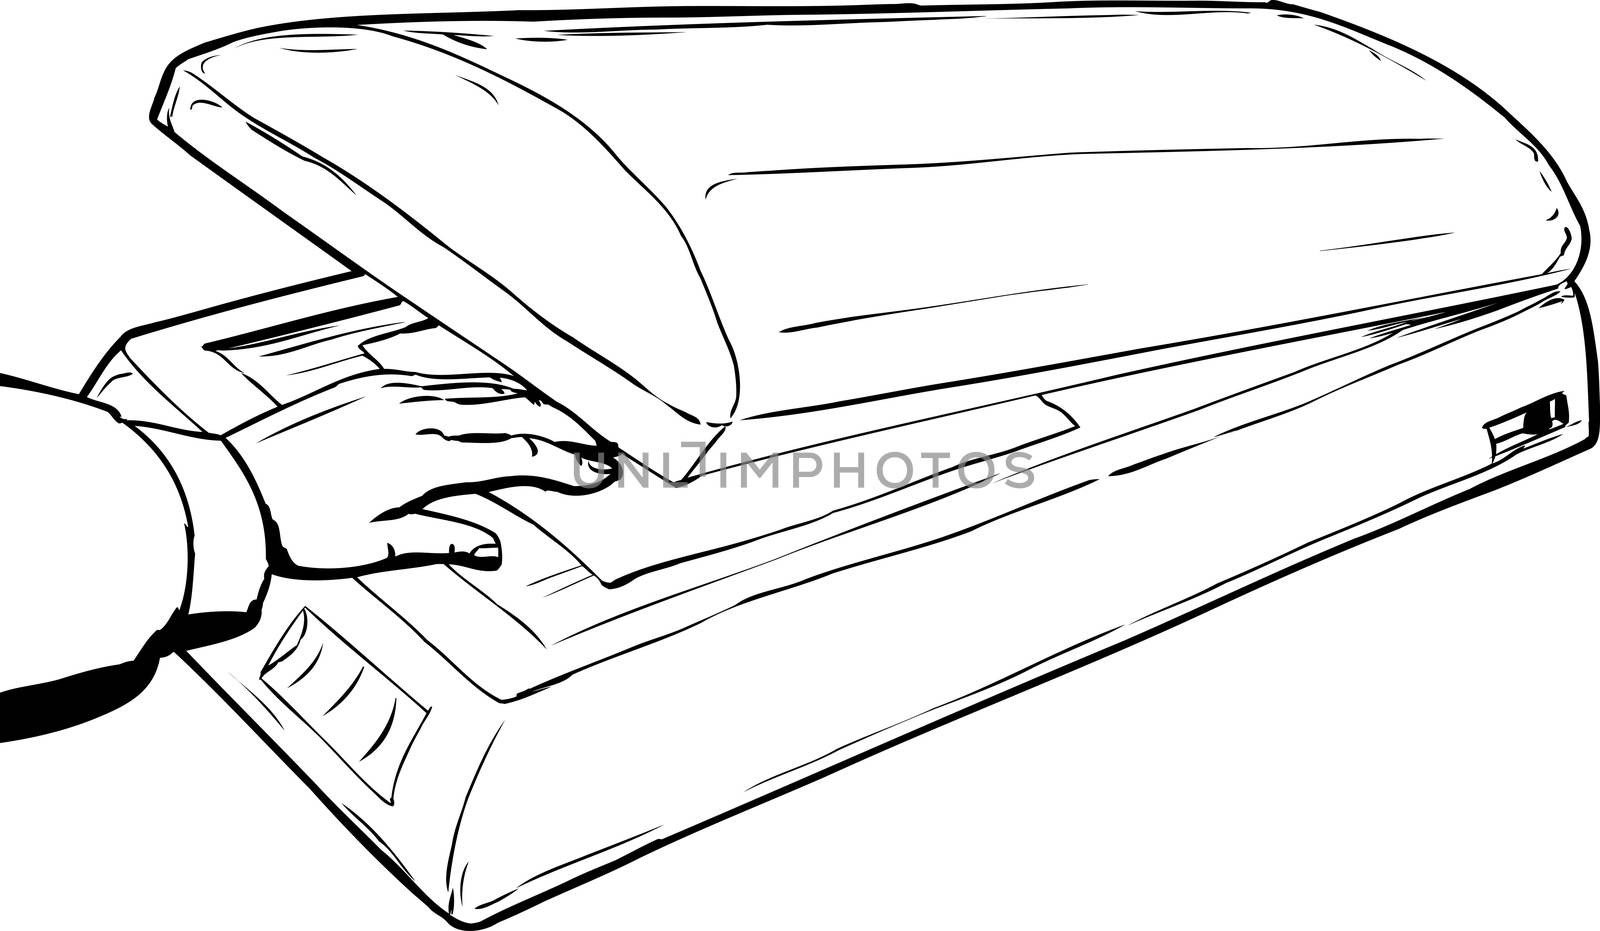 Outline sketch of hand placing paper in scanner by TheBlackRhino